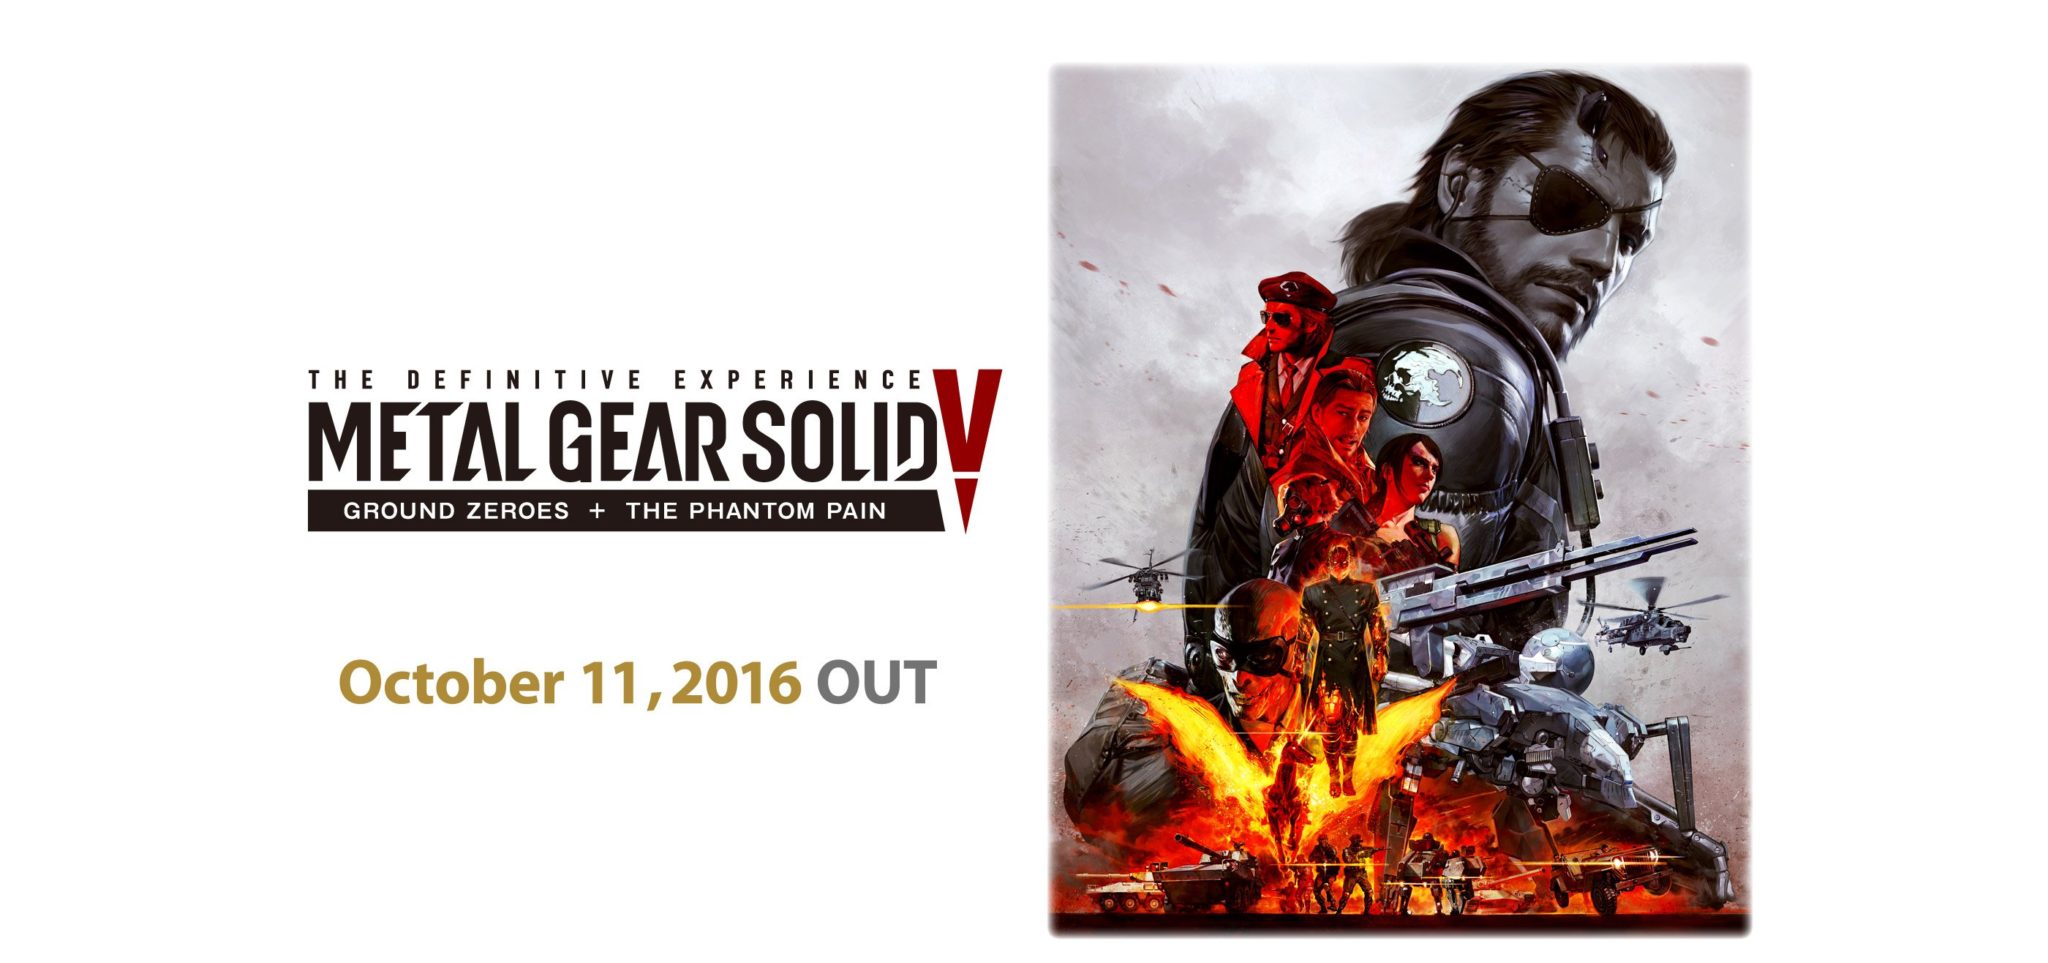 Metal Gear Solid V The Definitive Experience  (2)